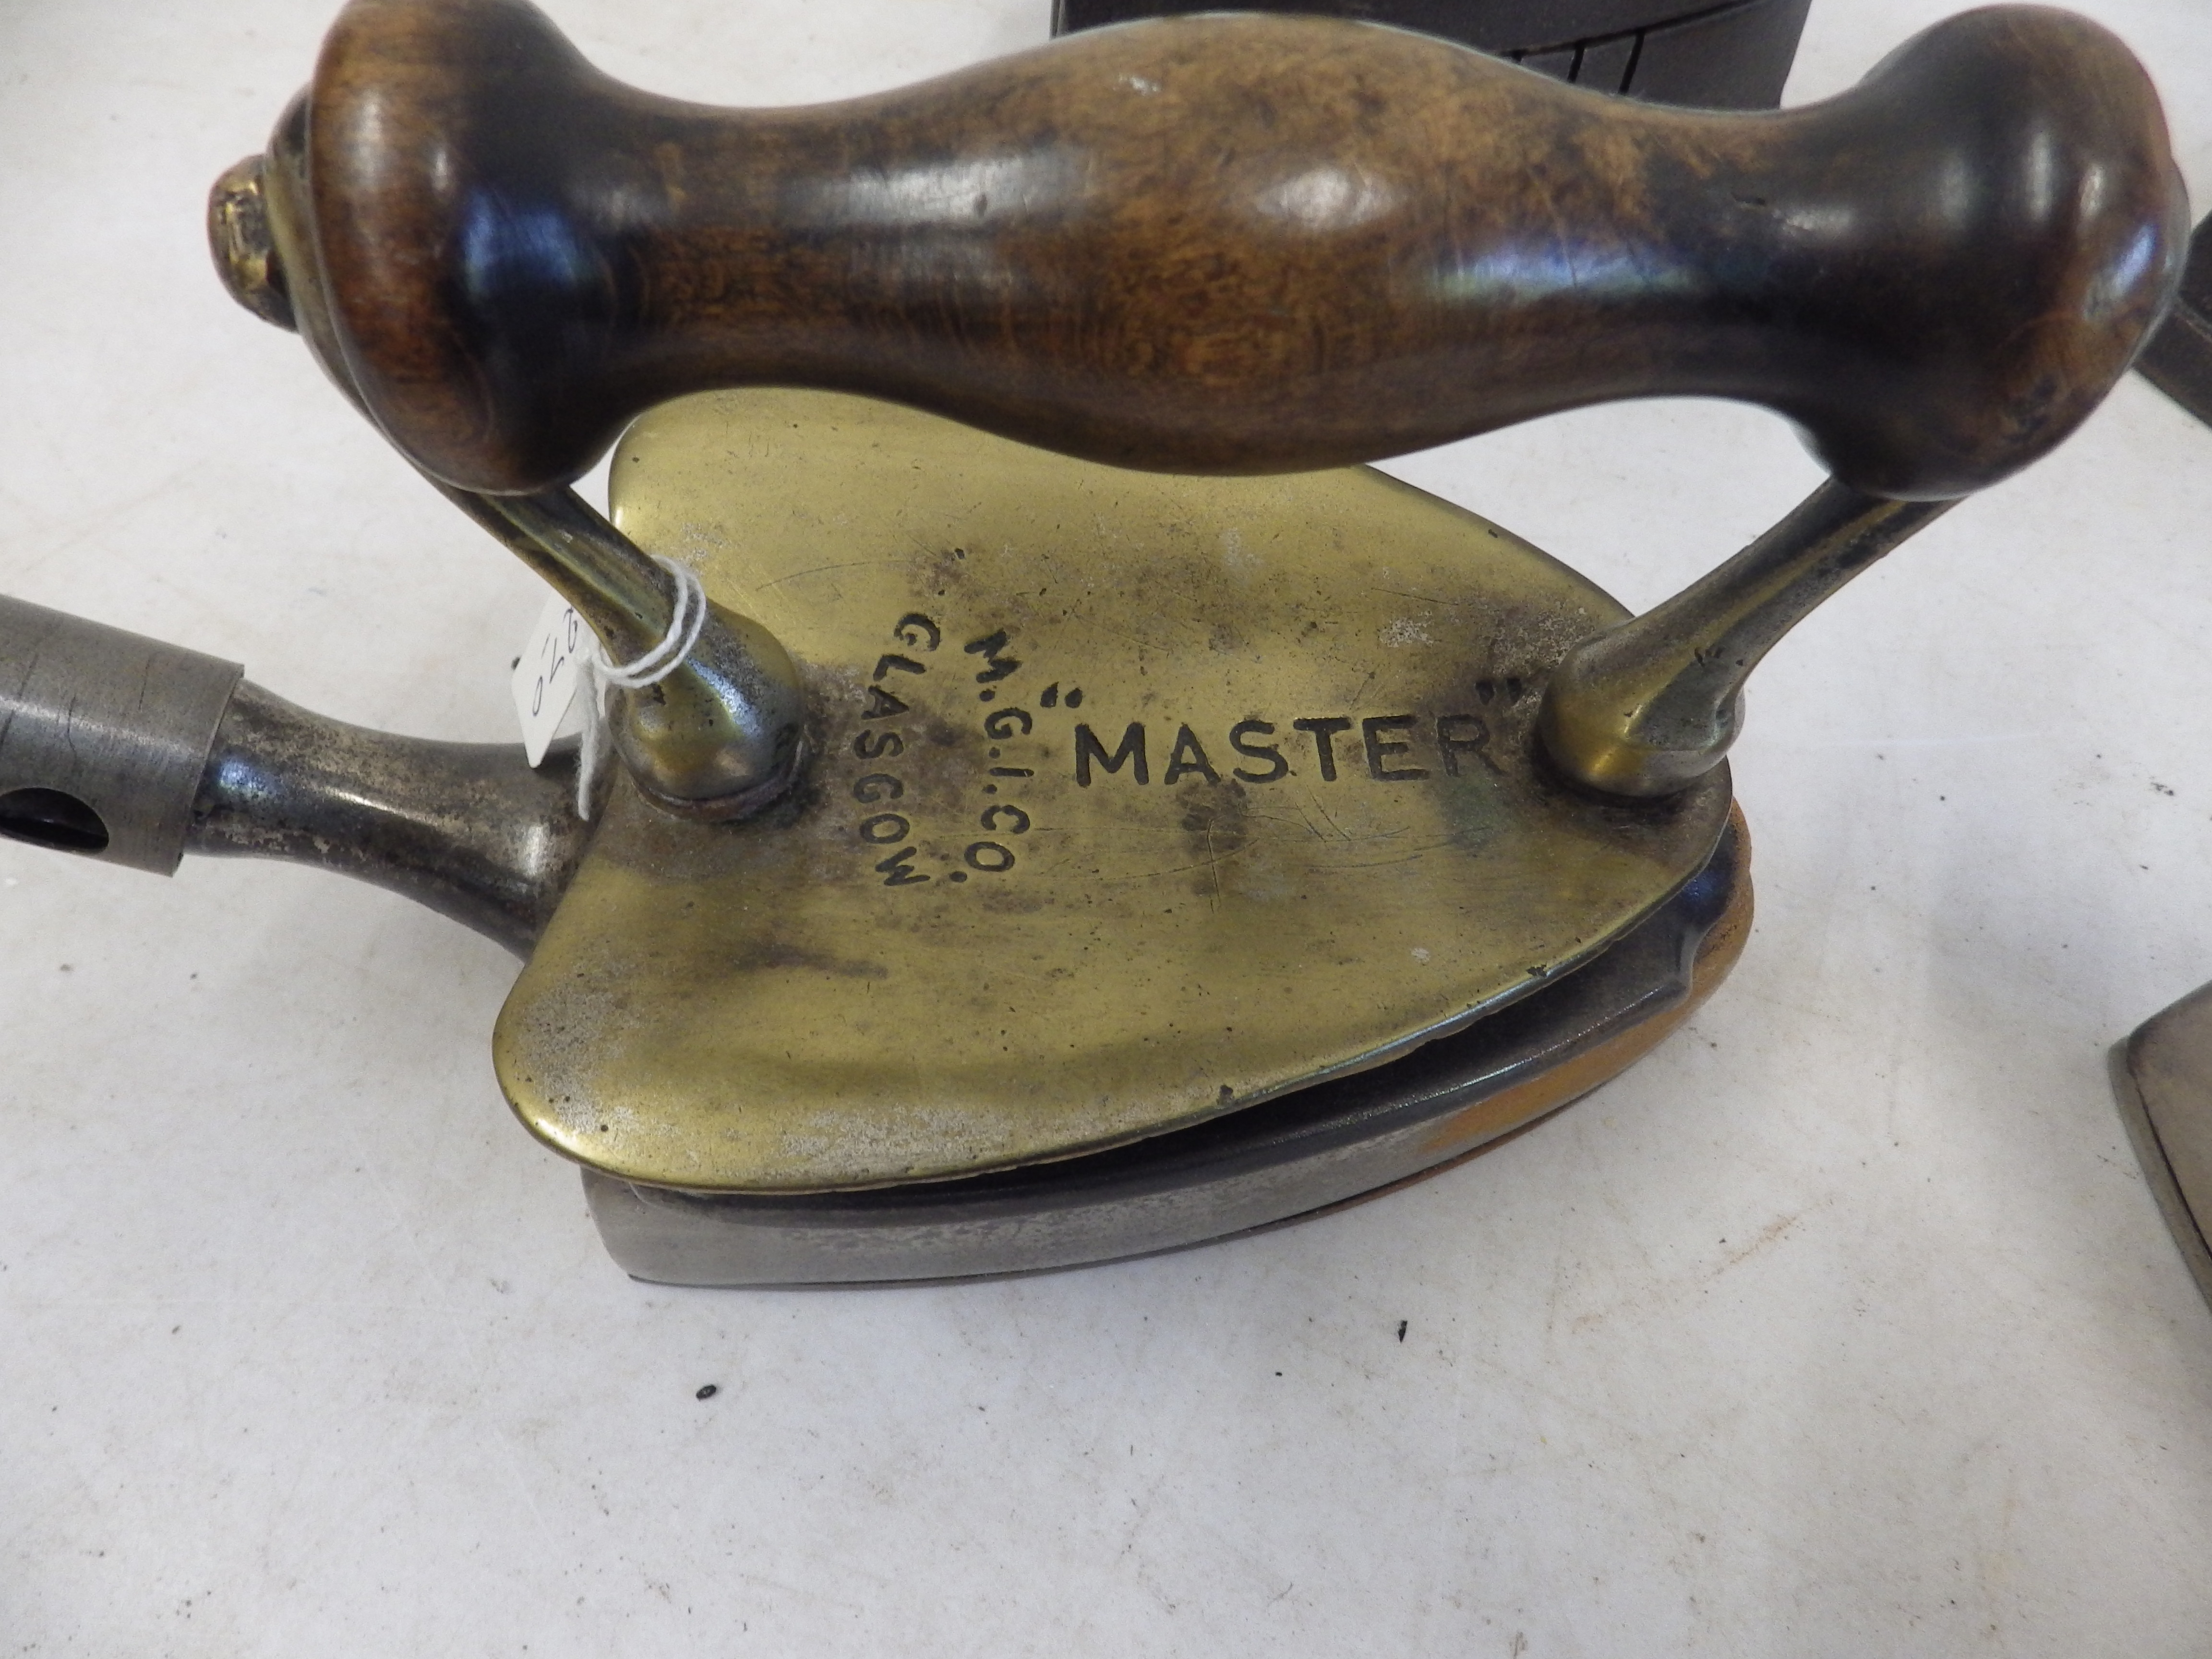 2 M G I Co Glasgow Master gas irons with copper/brass heat shields together with 2 Lister Bros No. - Image 3 of 6